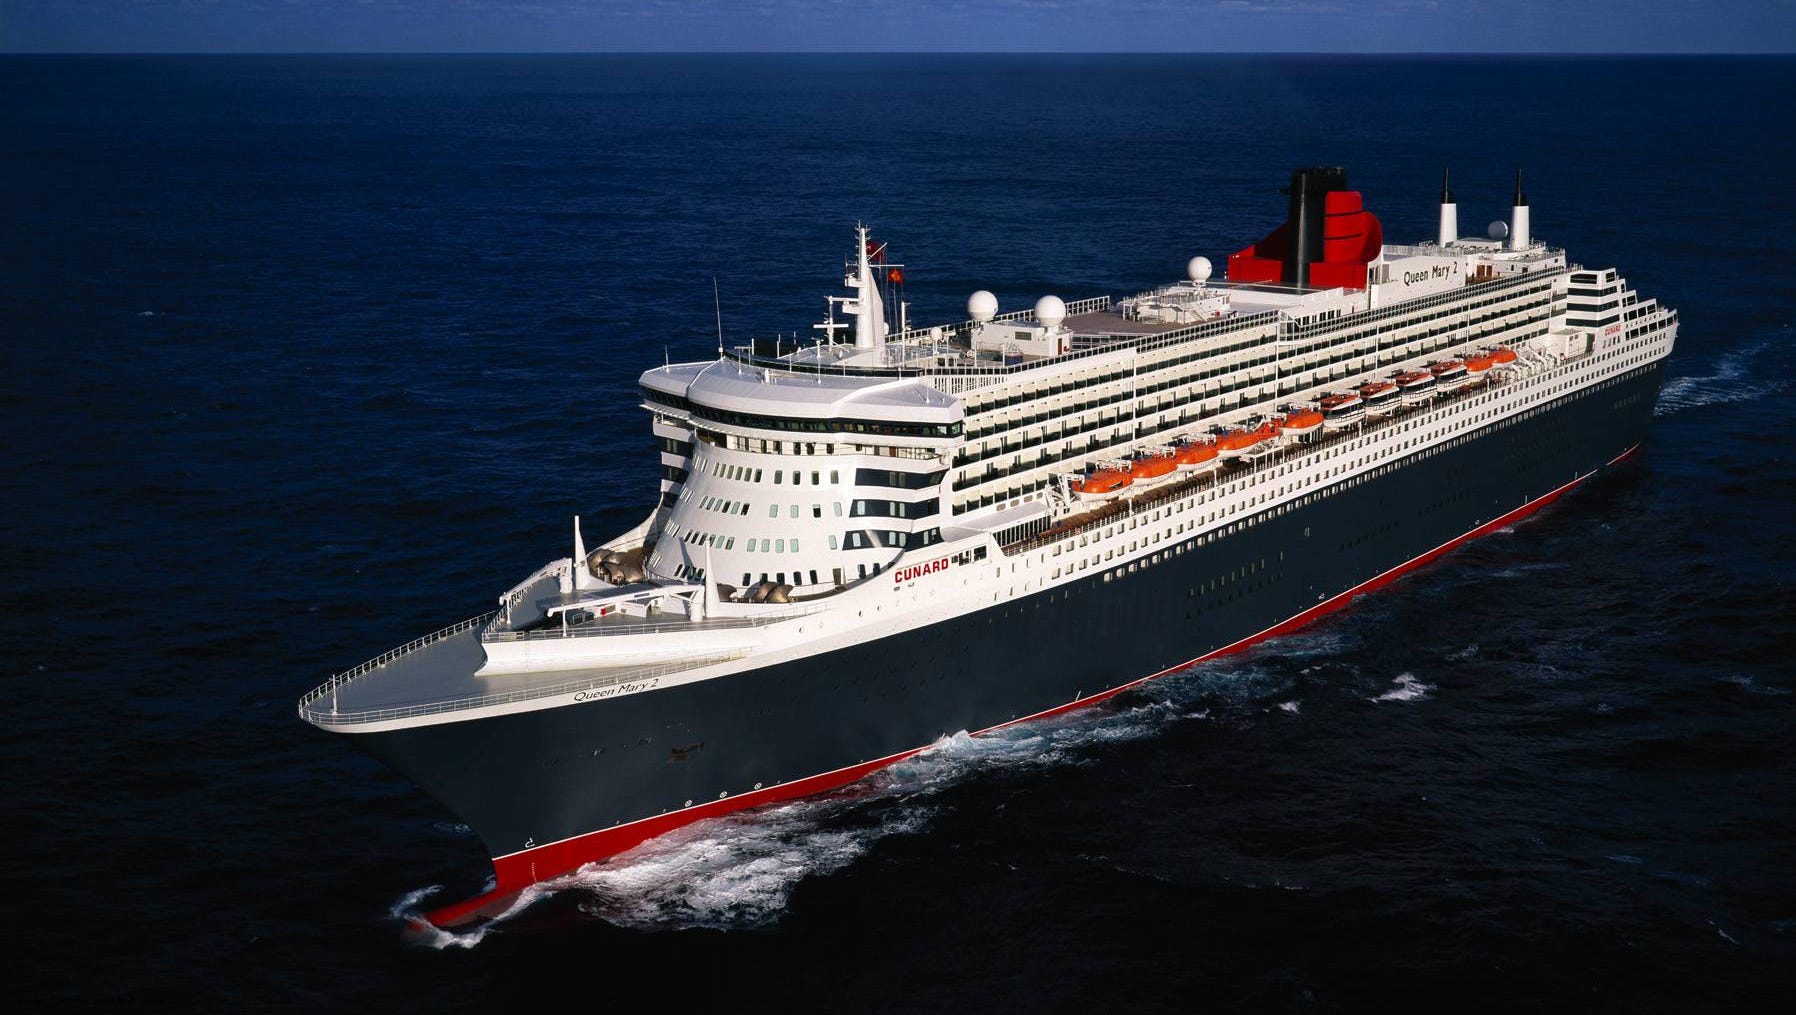 queen mary travel insurance